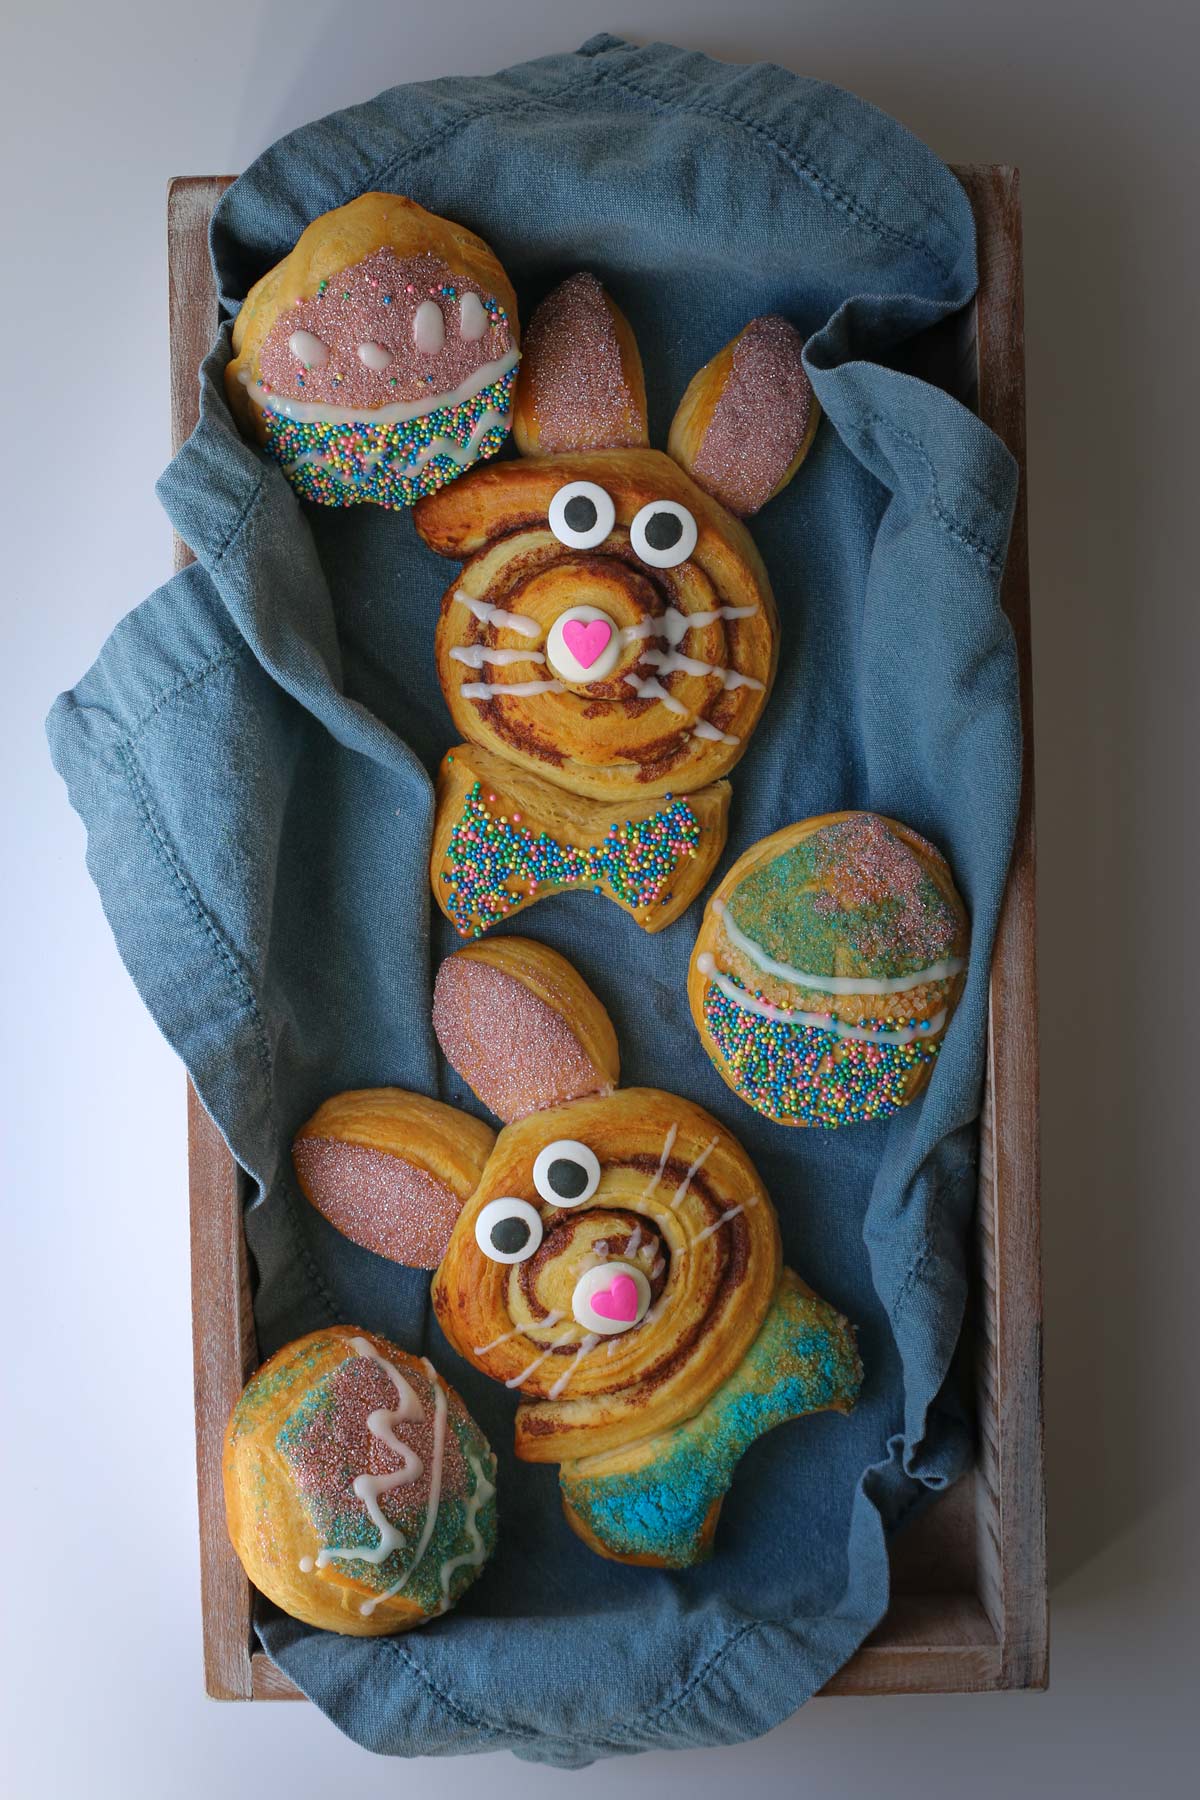 bunny rolls and Easter egg biscuits in blue cloth-lined basket.